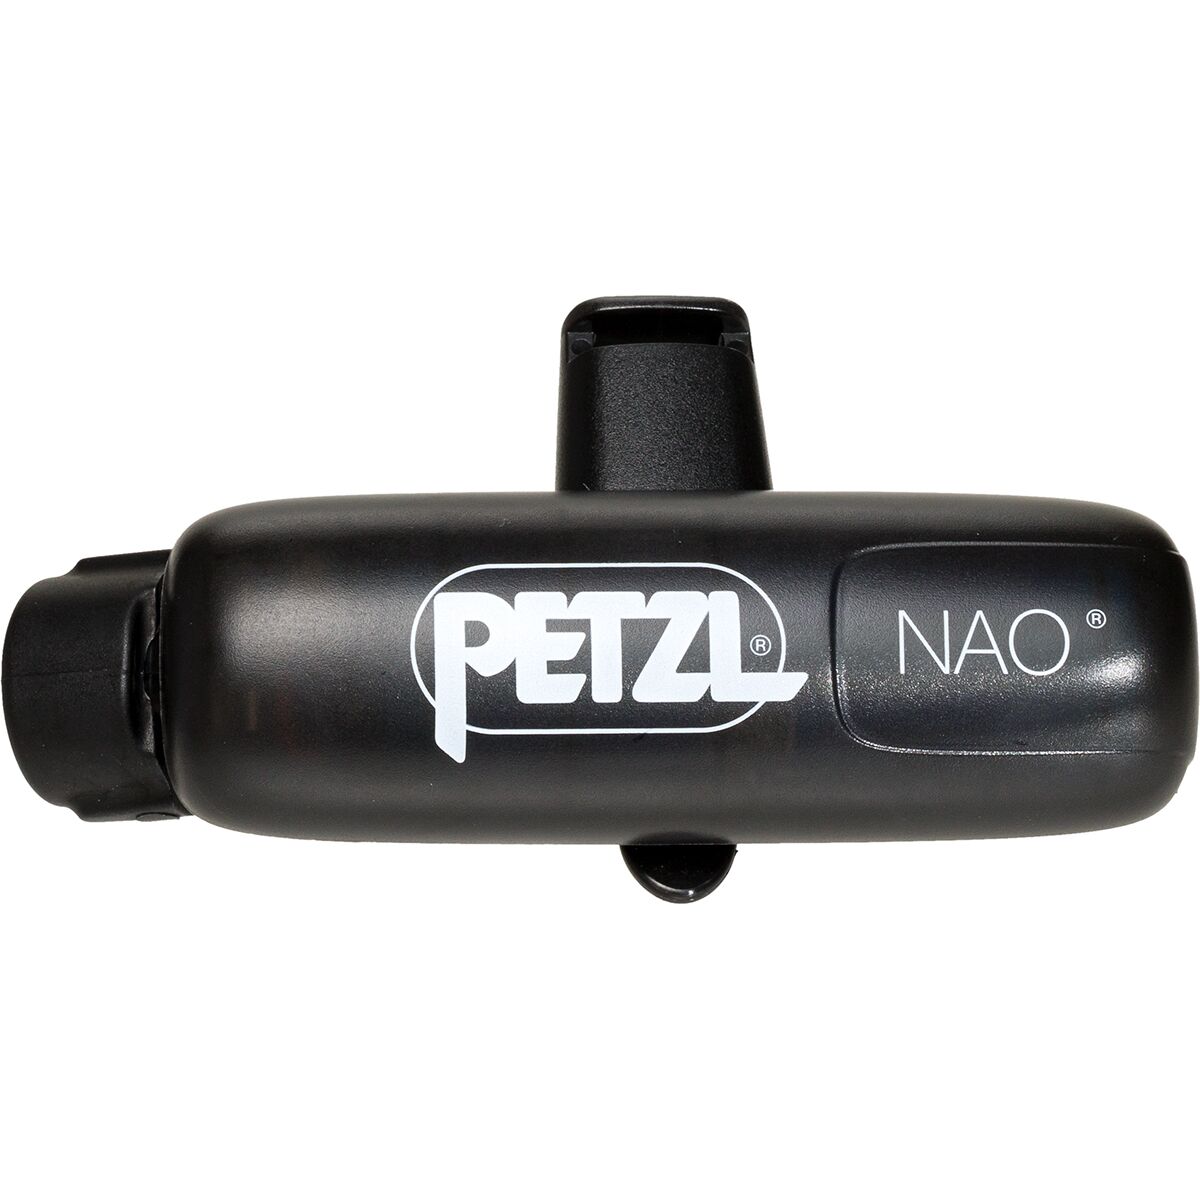 Microbe Kalmerend Master diploma Petzl Accu Nao Rechargeable Battery - Hike & Camp